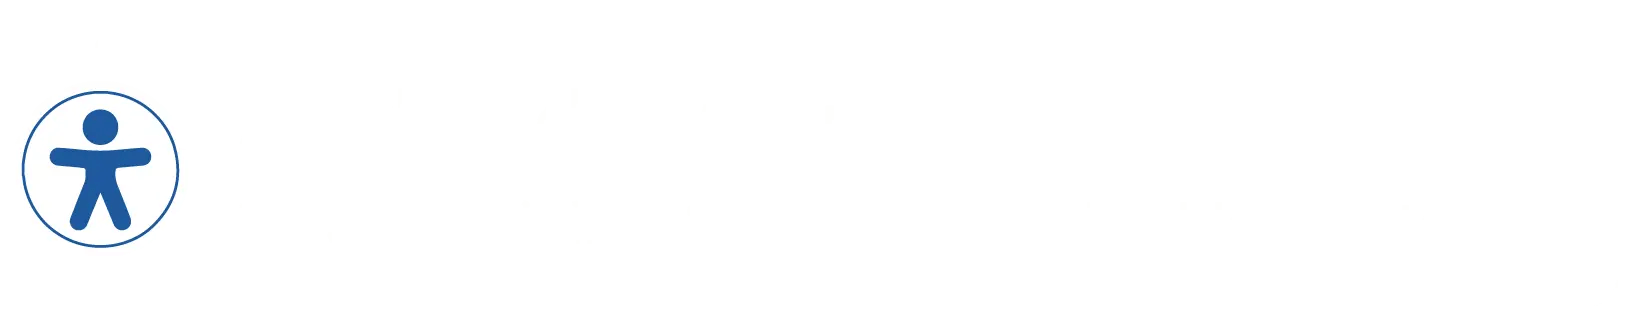 Audited and certified for accessibility and usability by disabled testers.